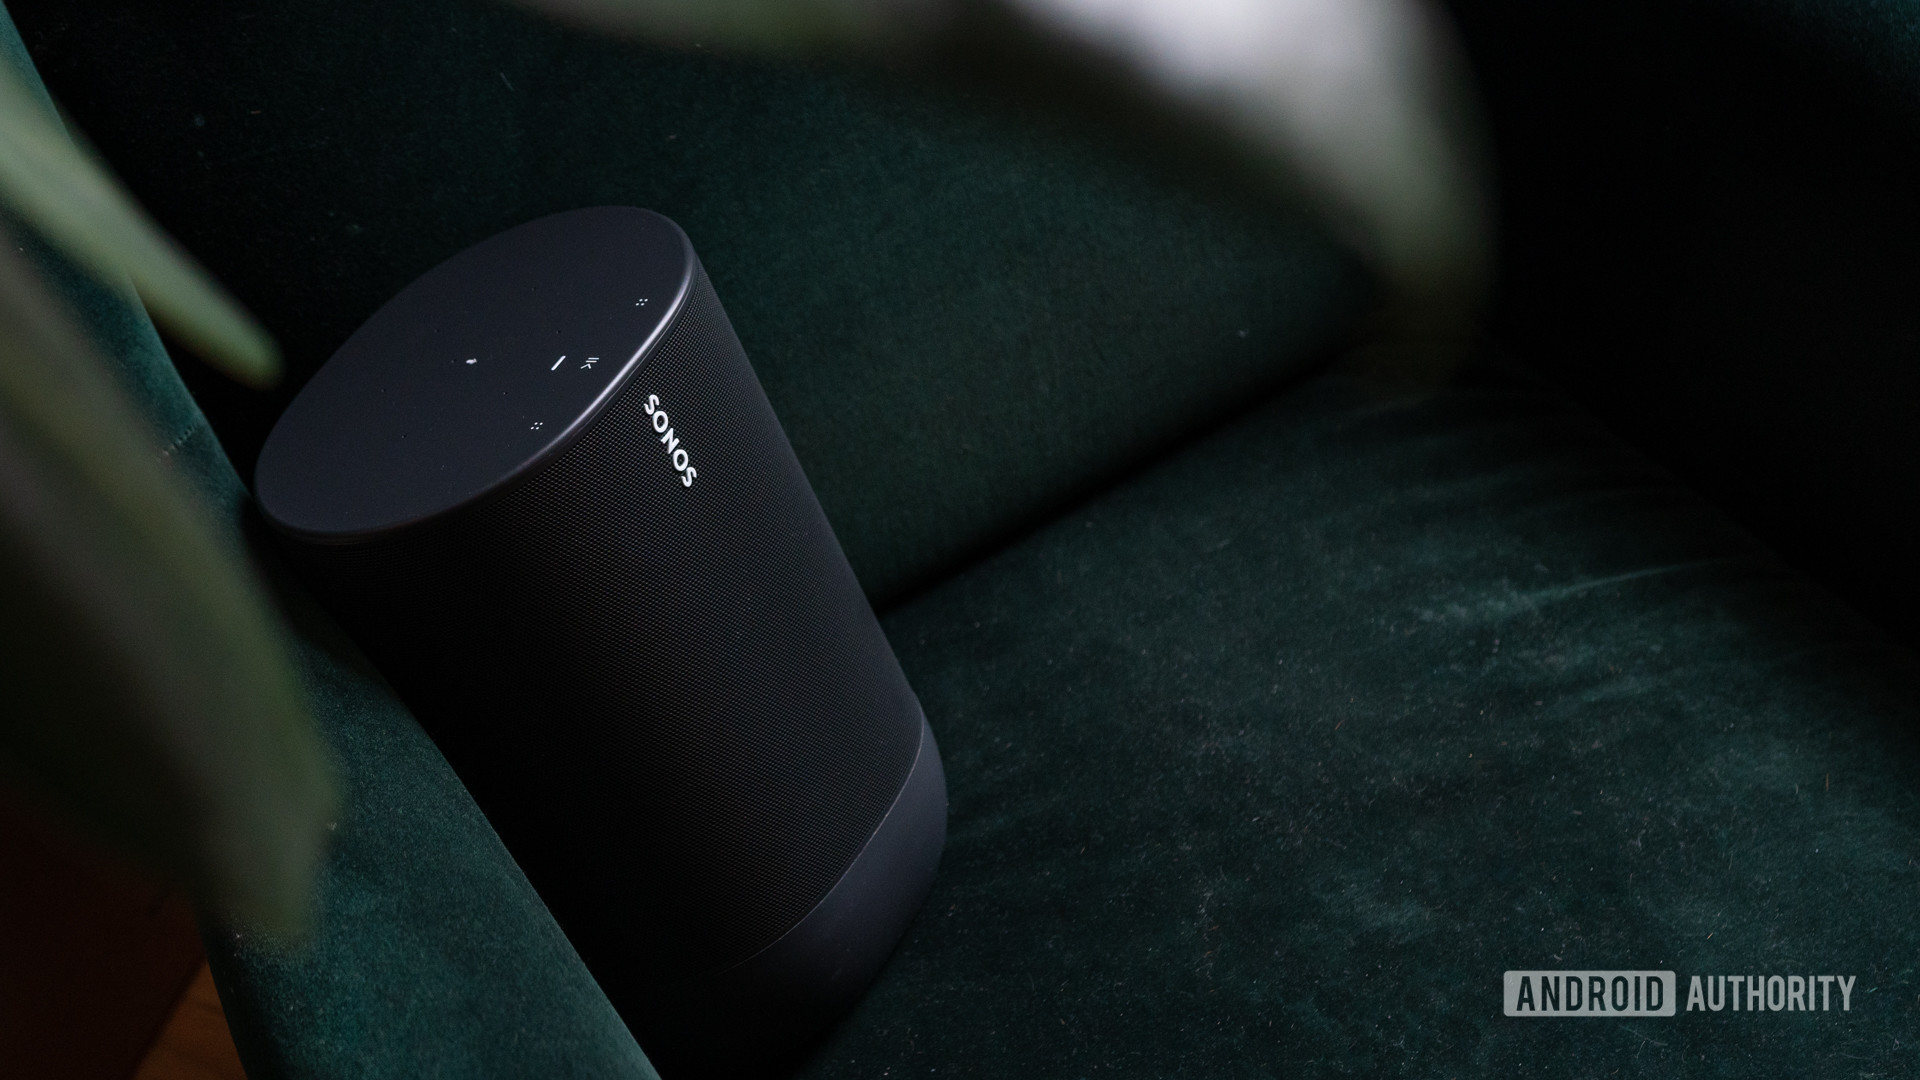 The Sonos Move Wi-Fi bluetooth smart speaker in black against a velvet couch.